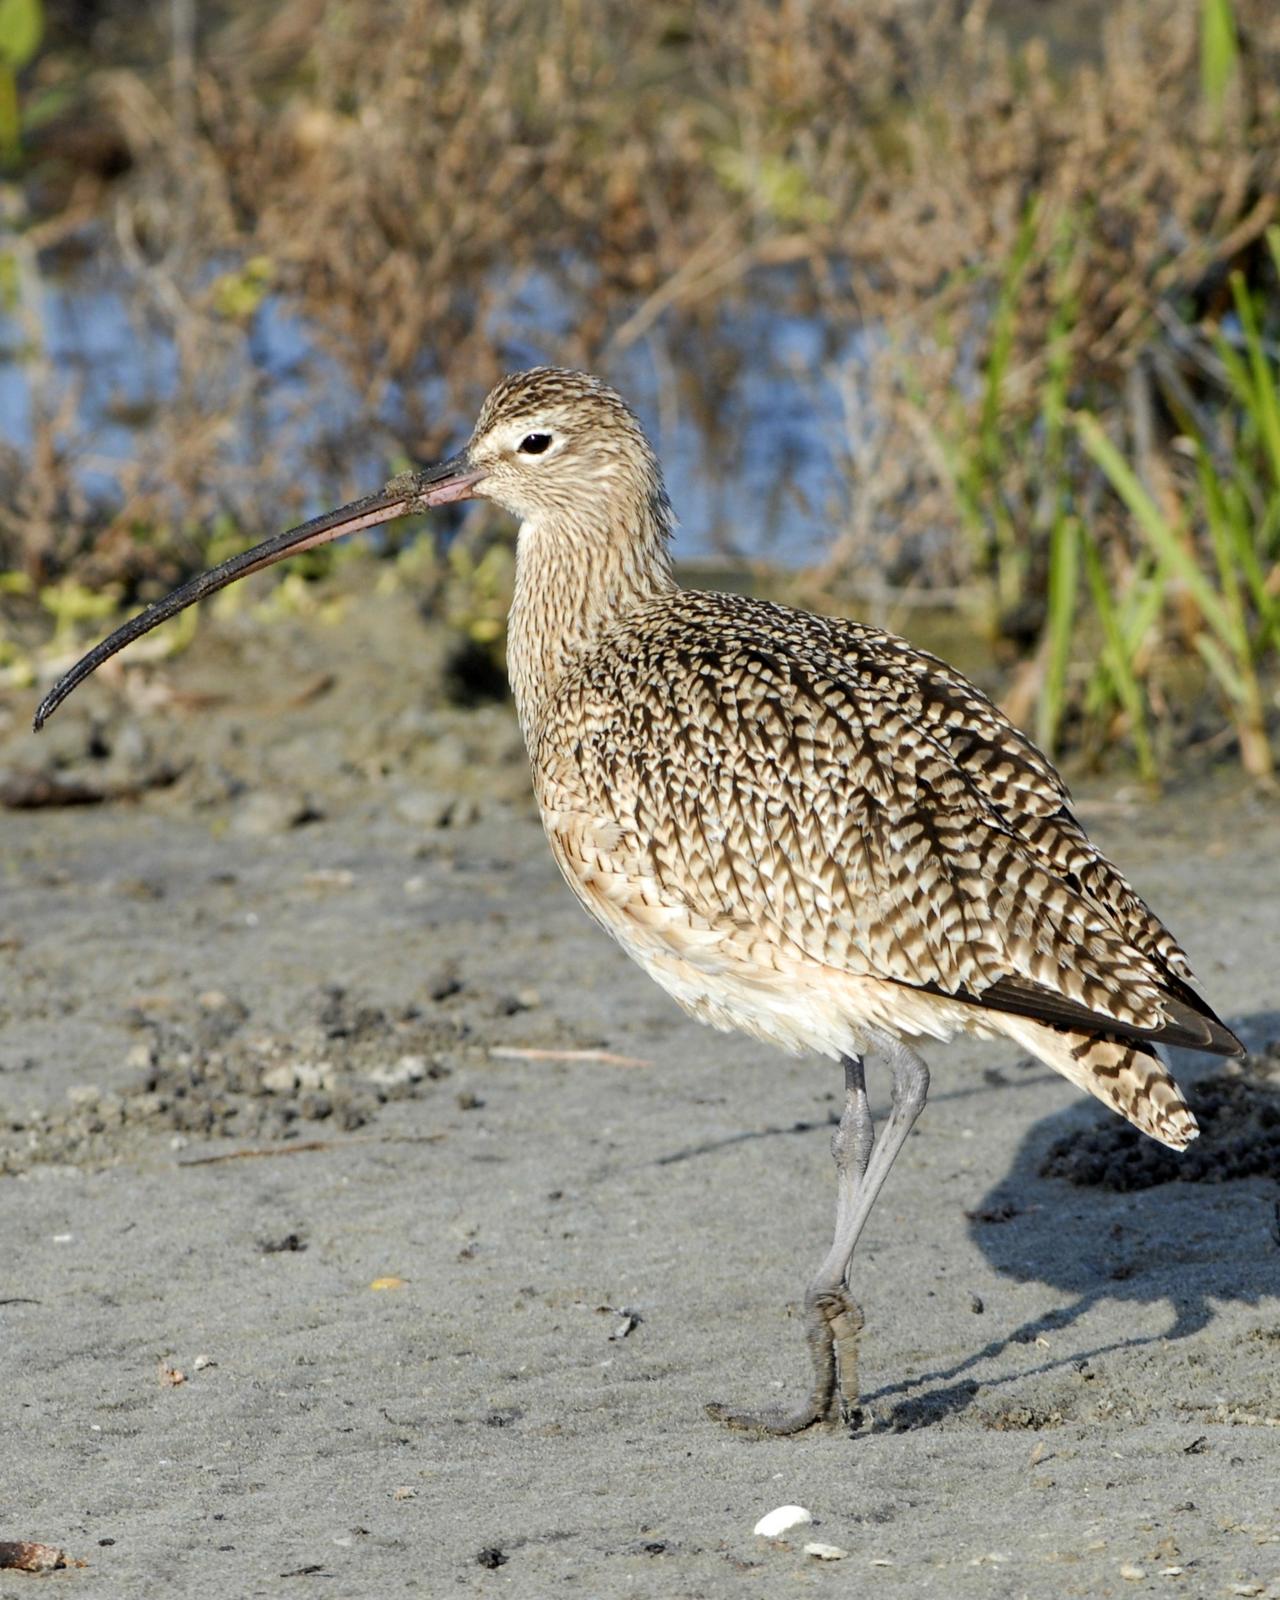 Long-billed Curlew Photo by David Hollie